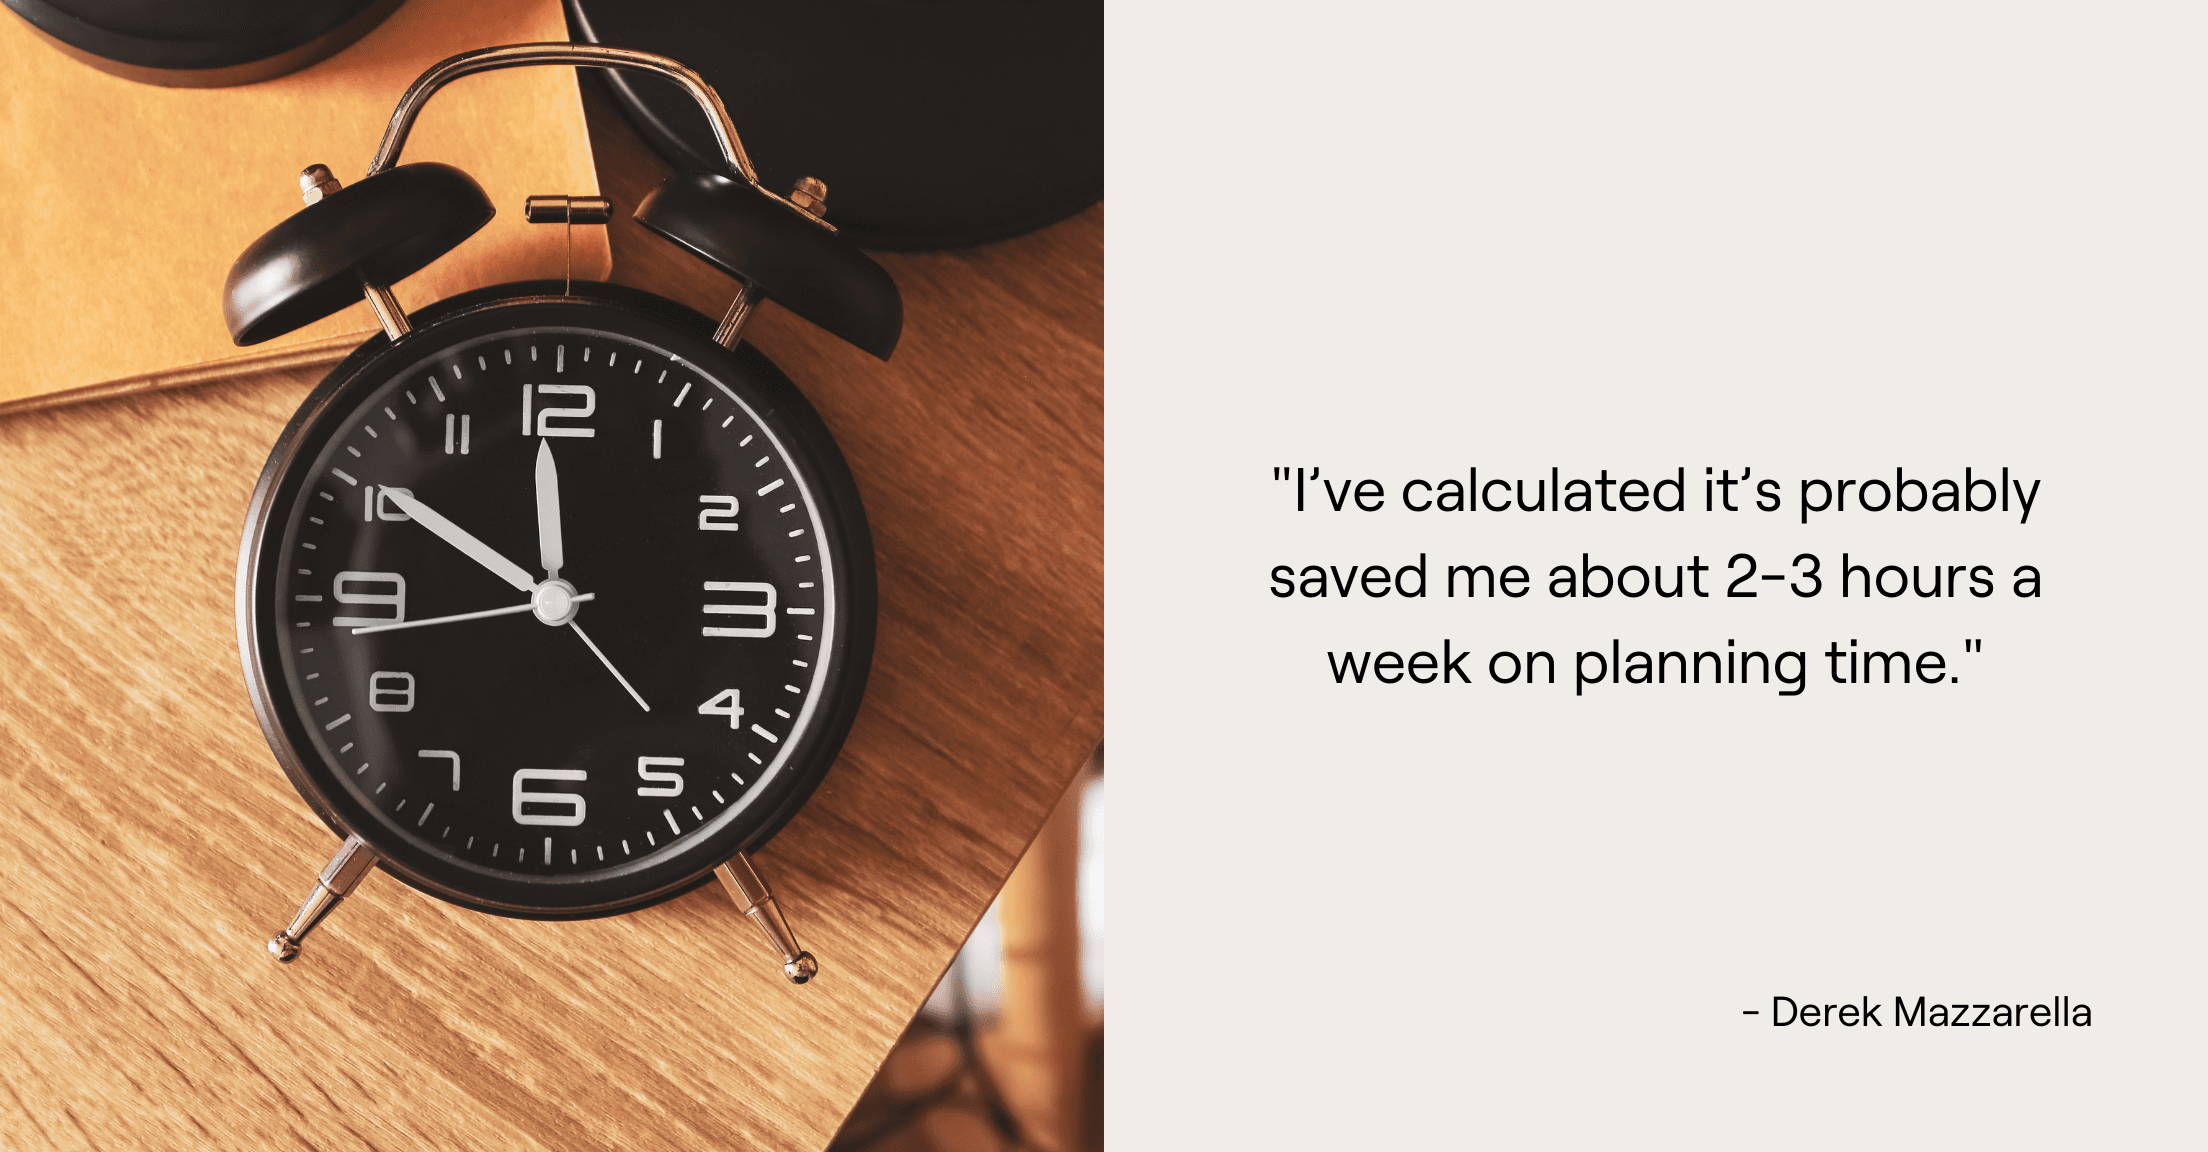 Clock image with advisor Derek Mazzarella quote, "I've calculated it's probably saved me about 2-3 hours a week on planning time."